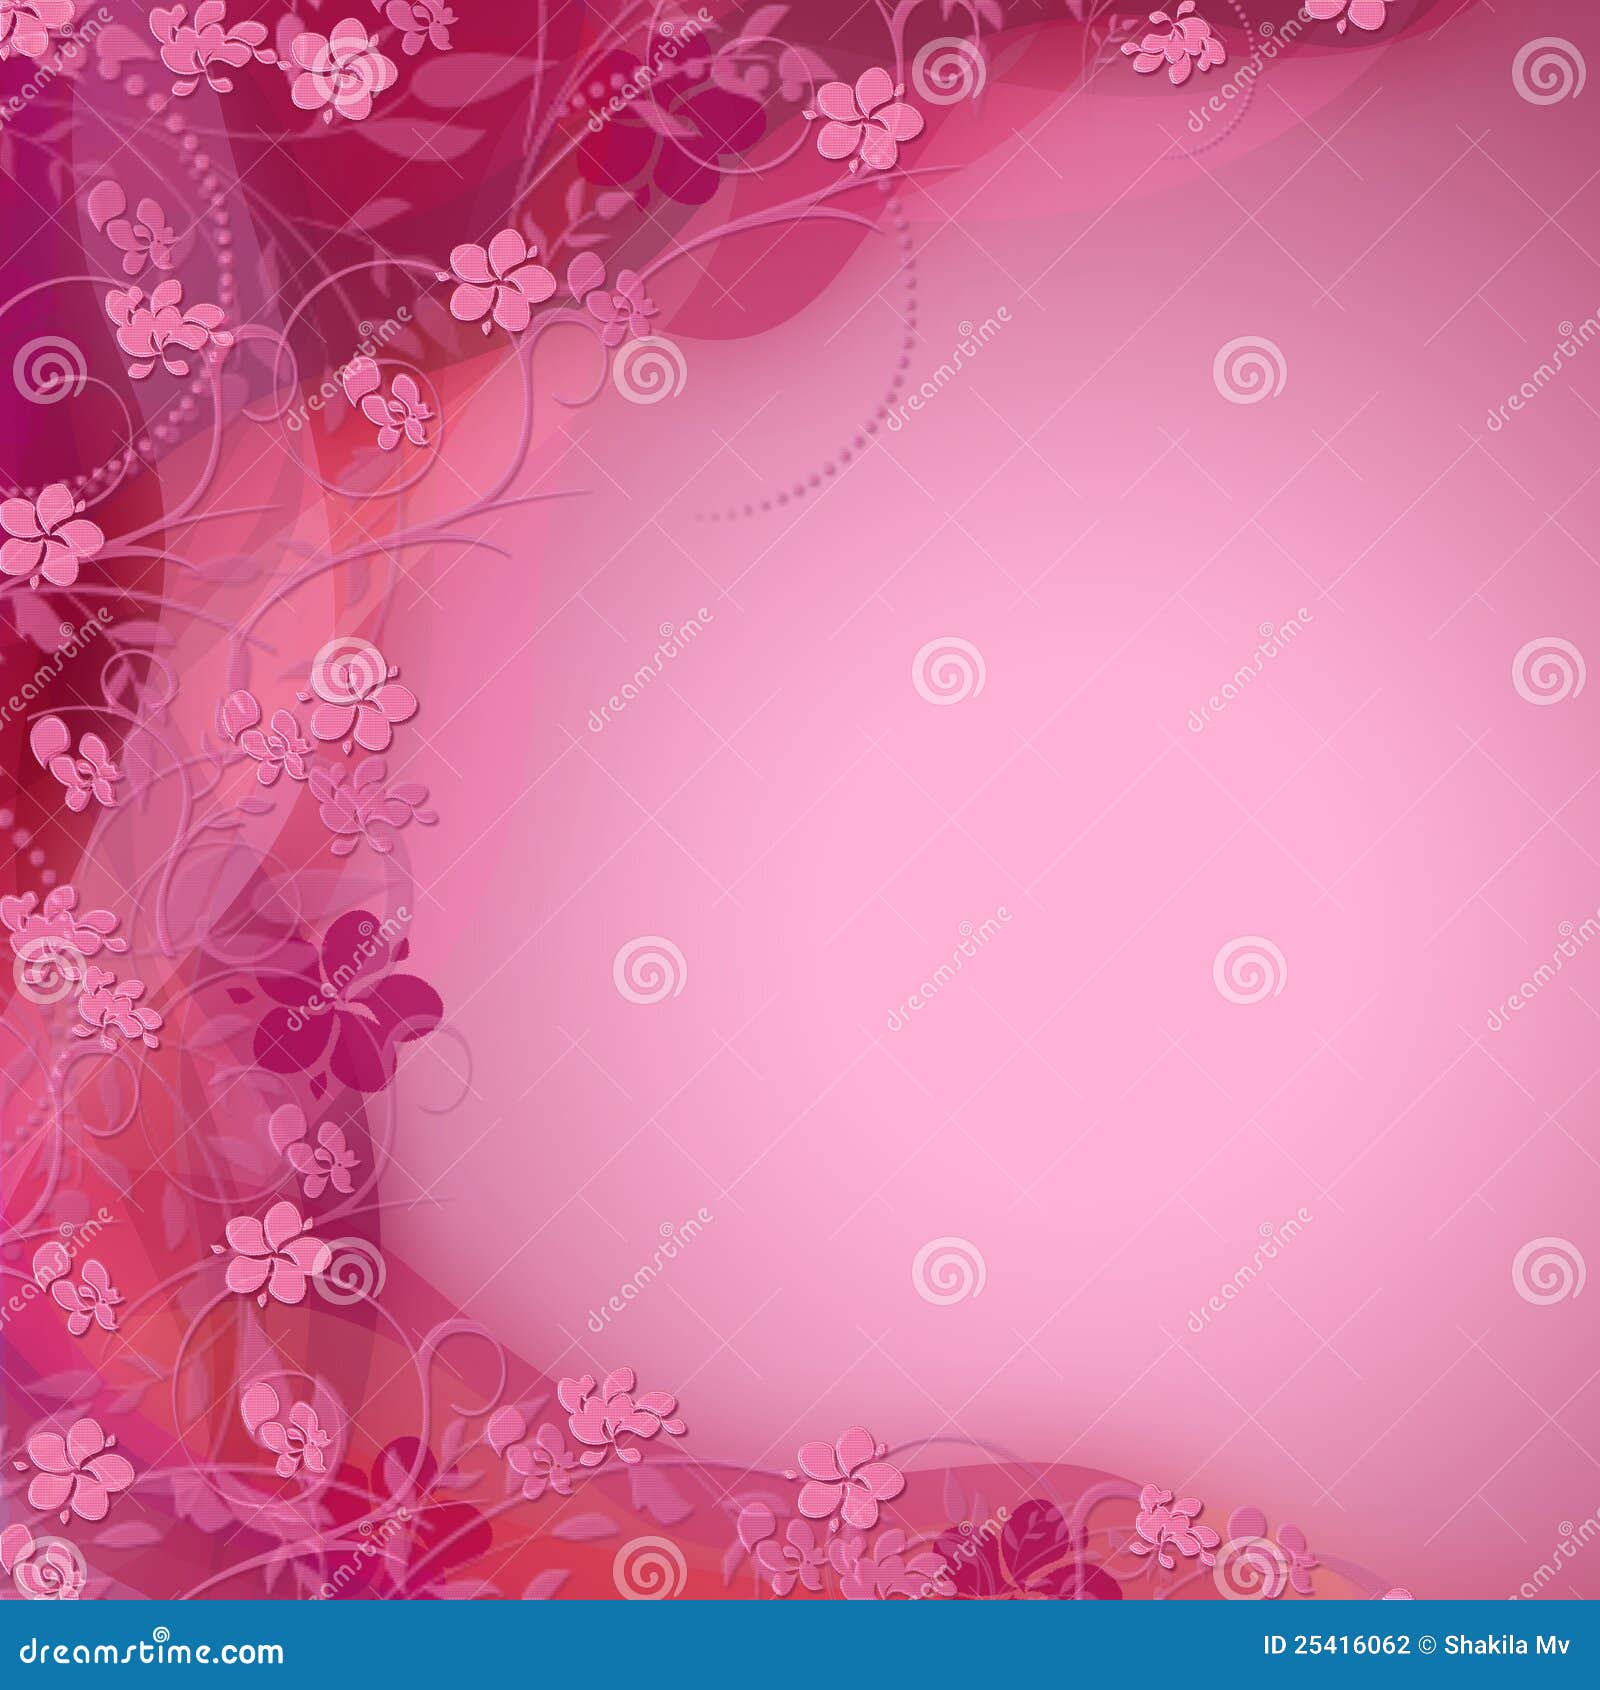 cute pink floral color shaded background